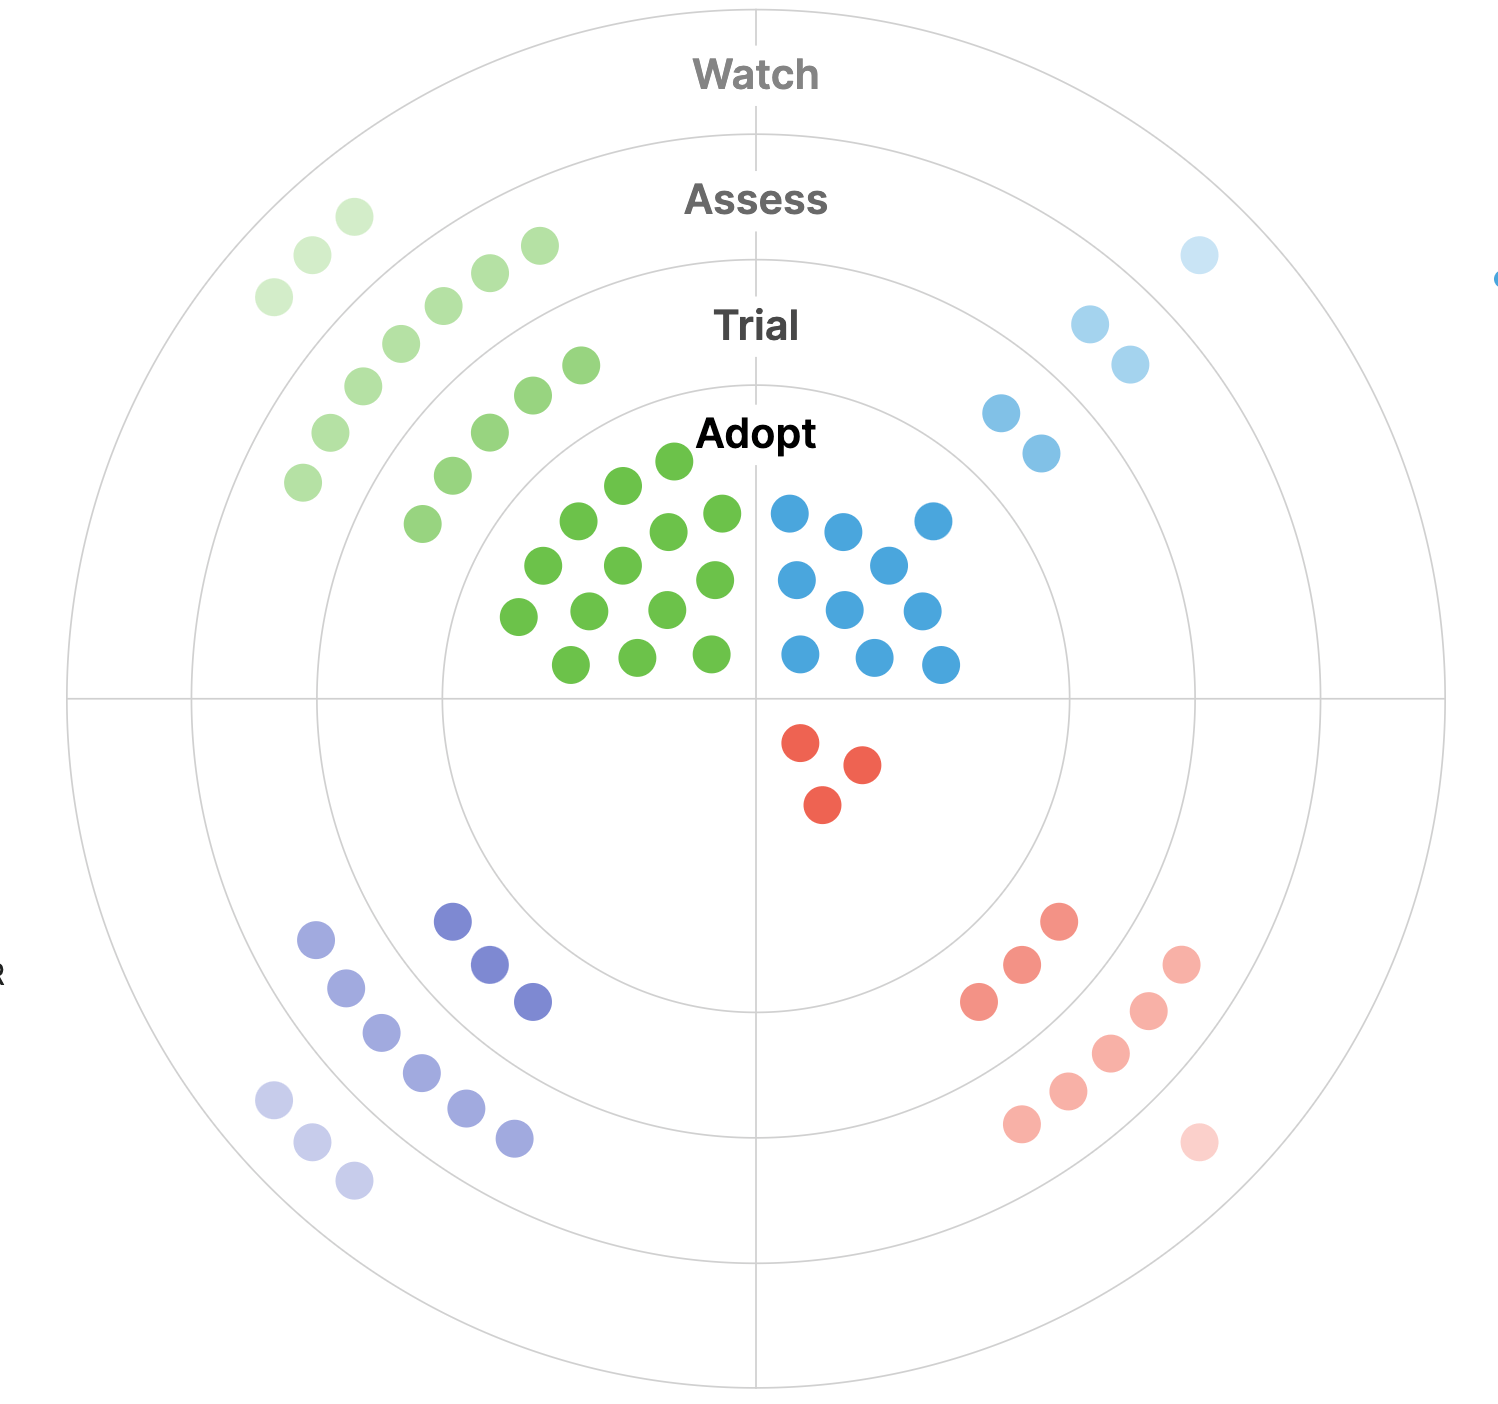 Screenshot of the geospatial tech radar with dots in four different colors arranged around a circle in various rings mapping to categories: Adopt, Trial, Assess, and Watch